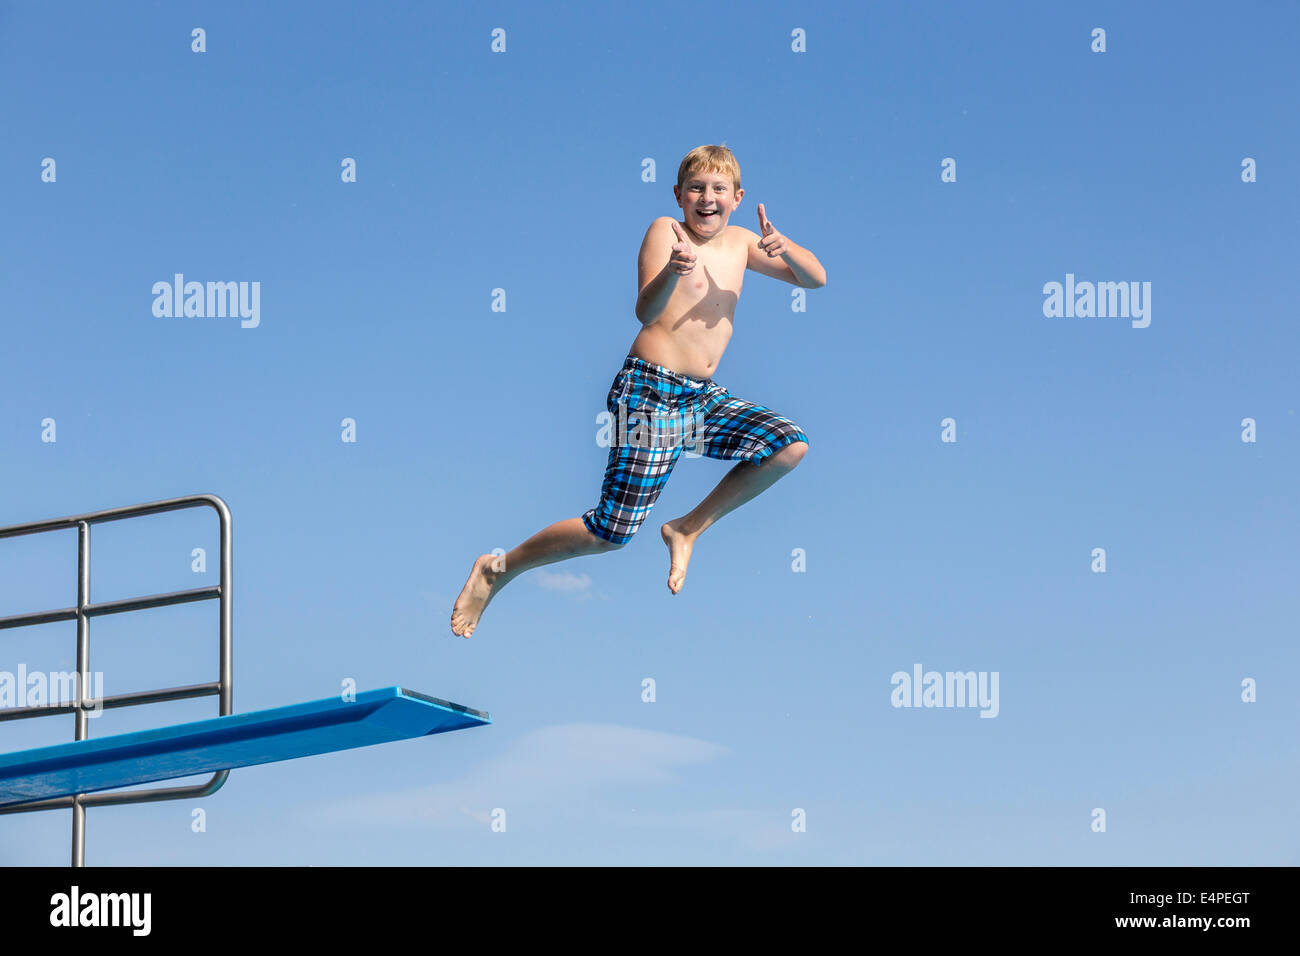 Boy, 10 years, jumping from a three-meter board making a thumbs up gesture Stock Photo